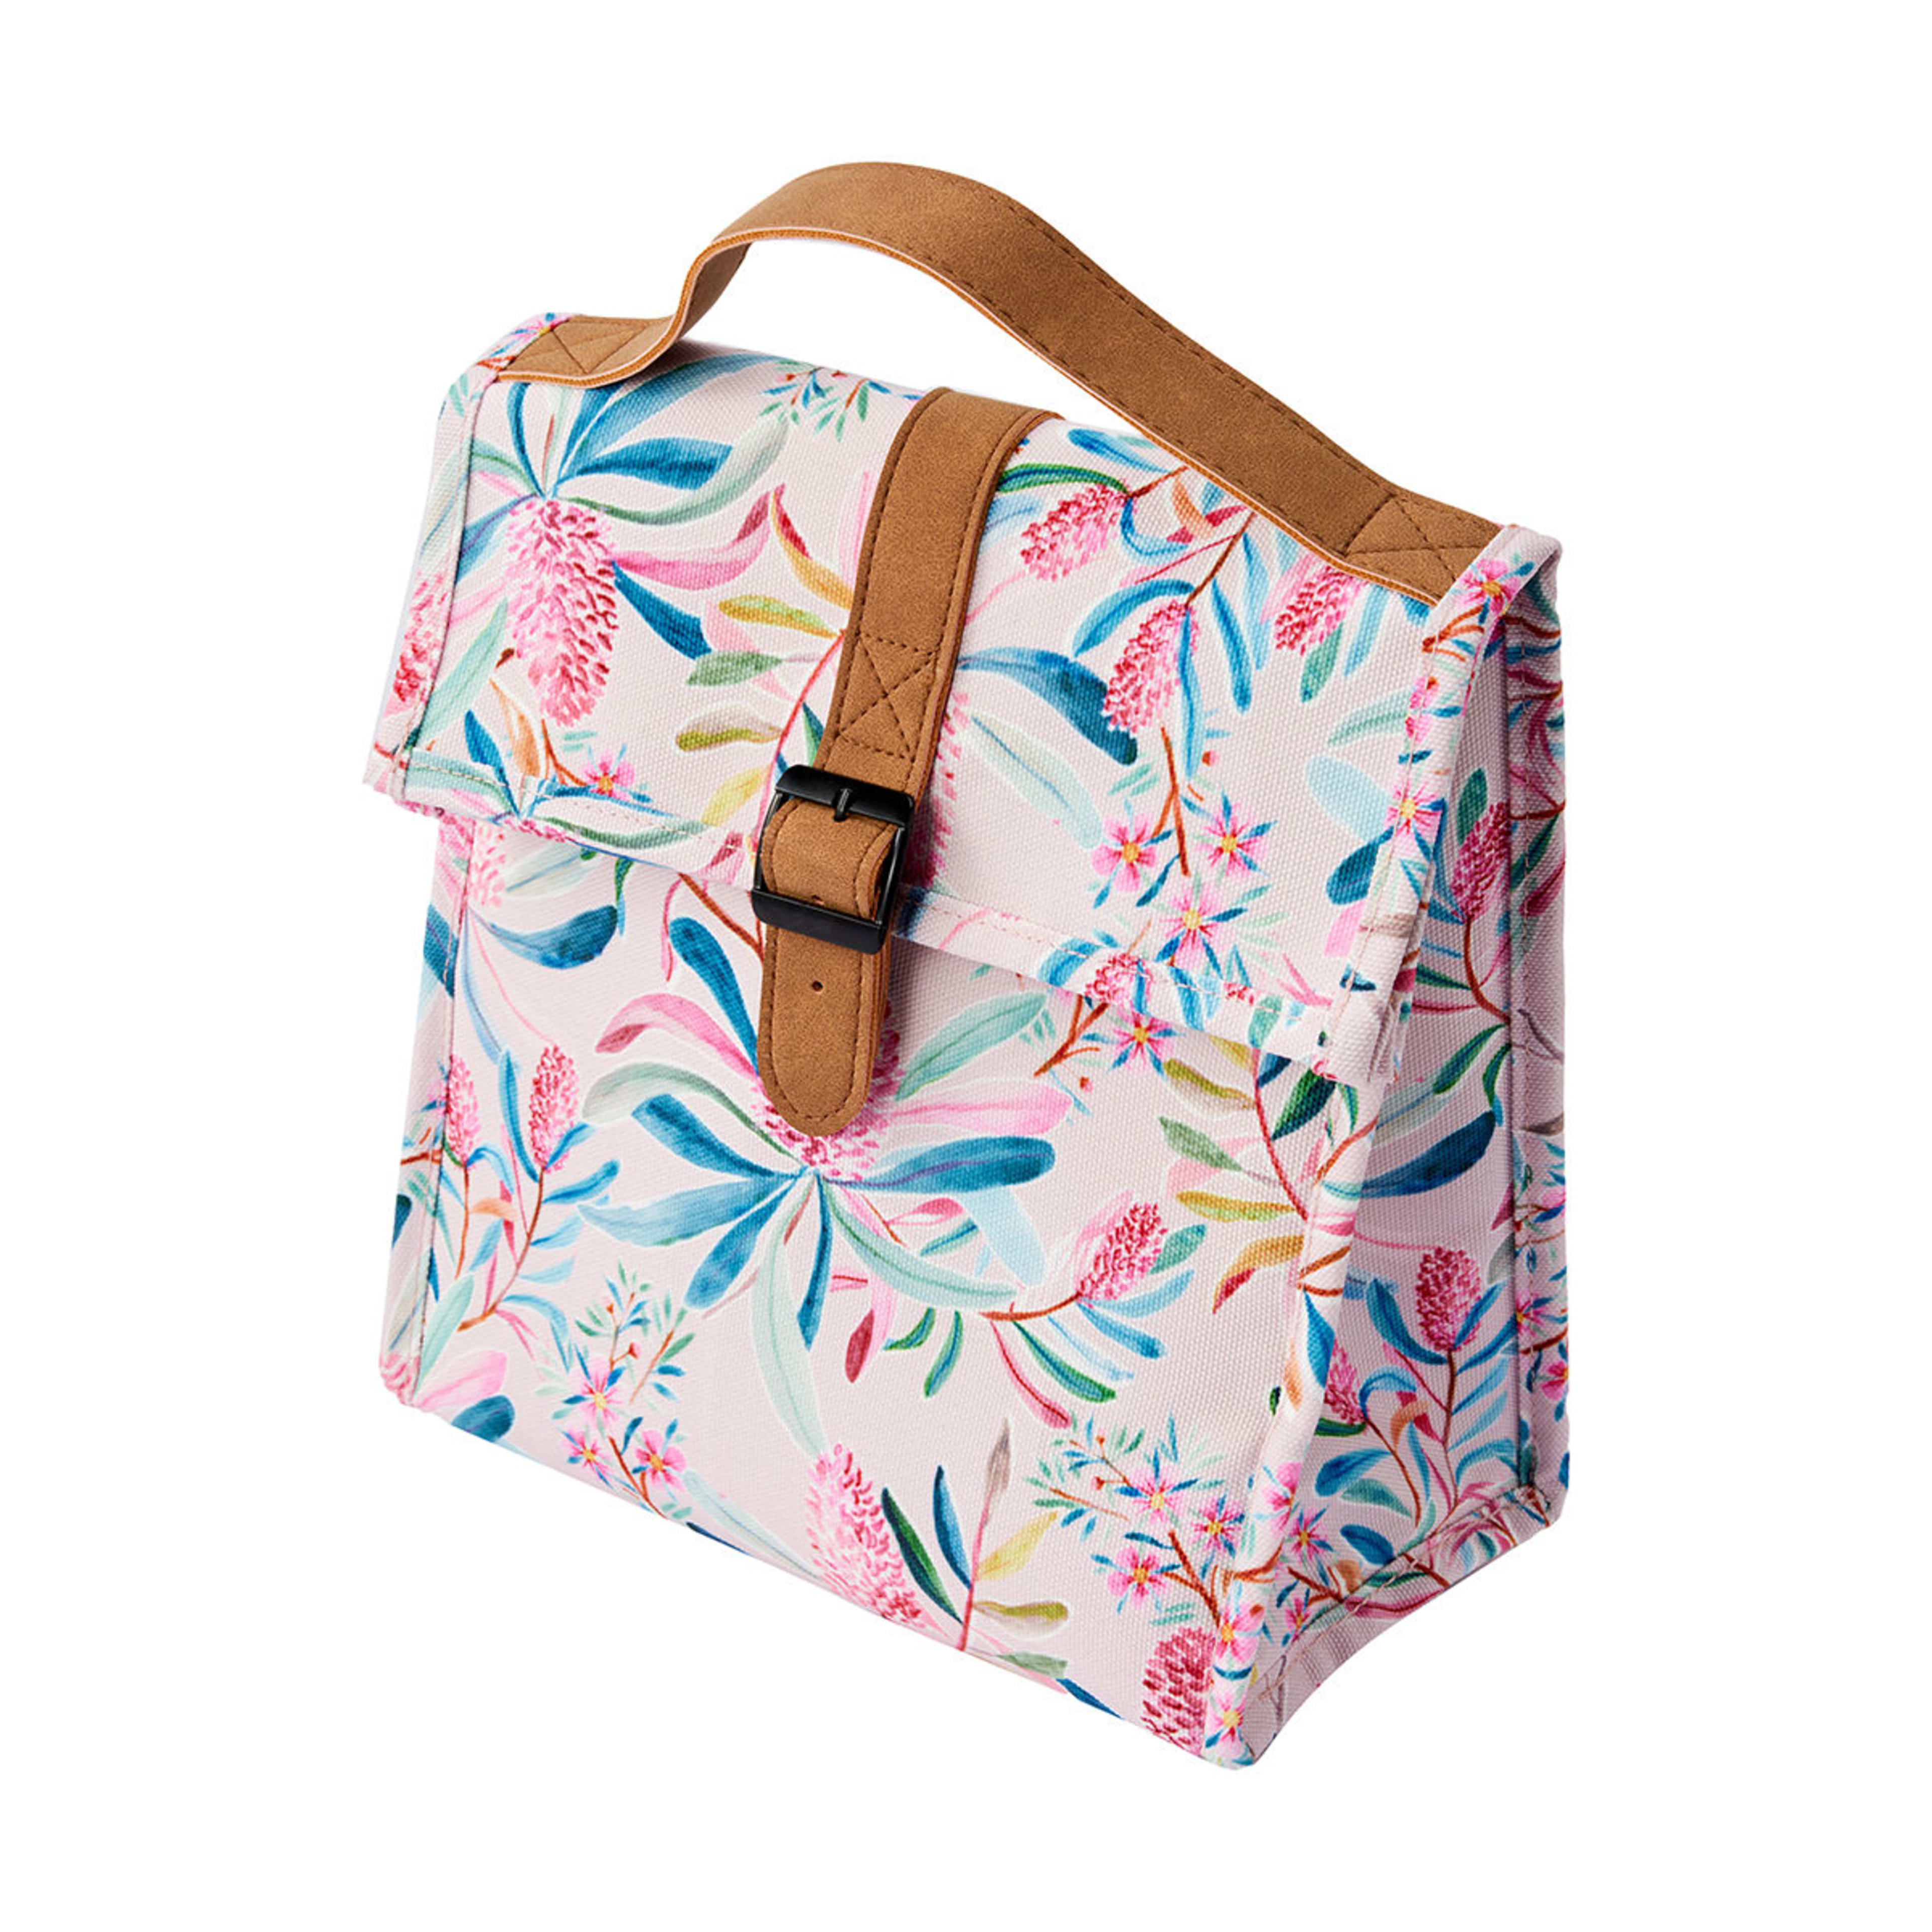 Native Floral Insulated Satchel Lunch Bag - Kmart